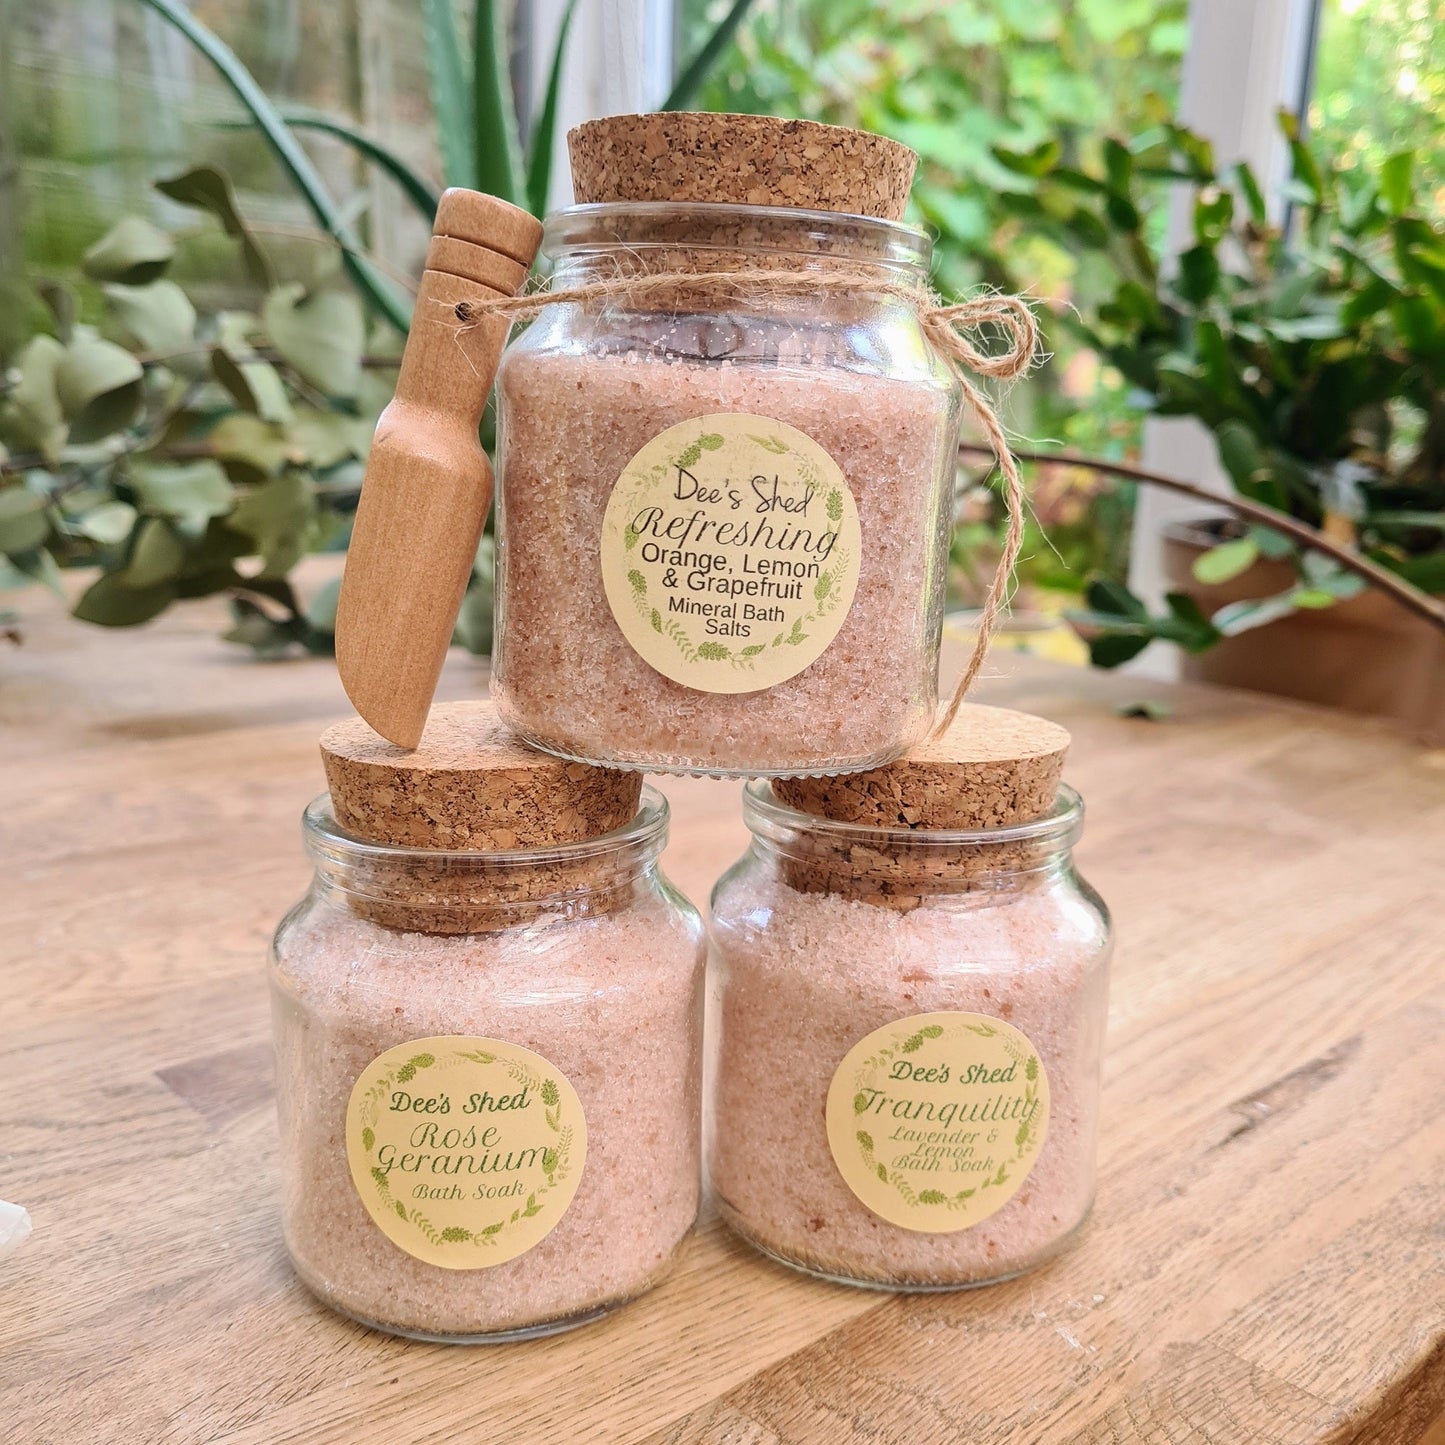 Tranquility Bath Salts - Dees Shed